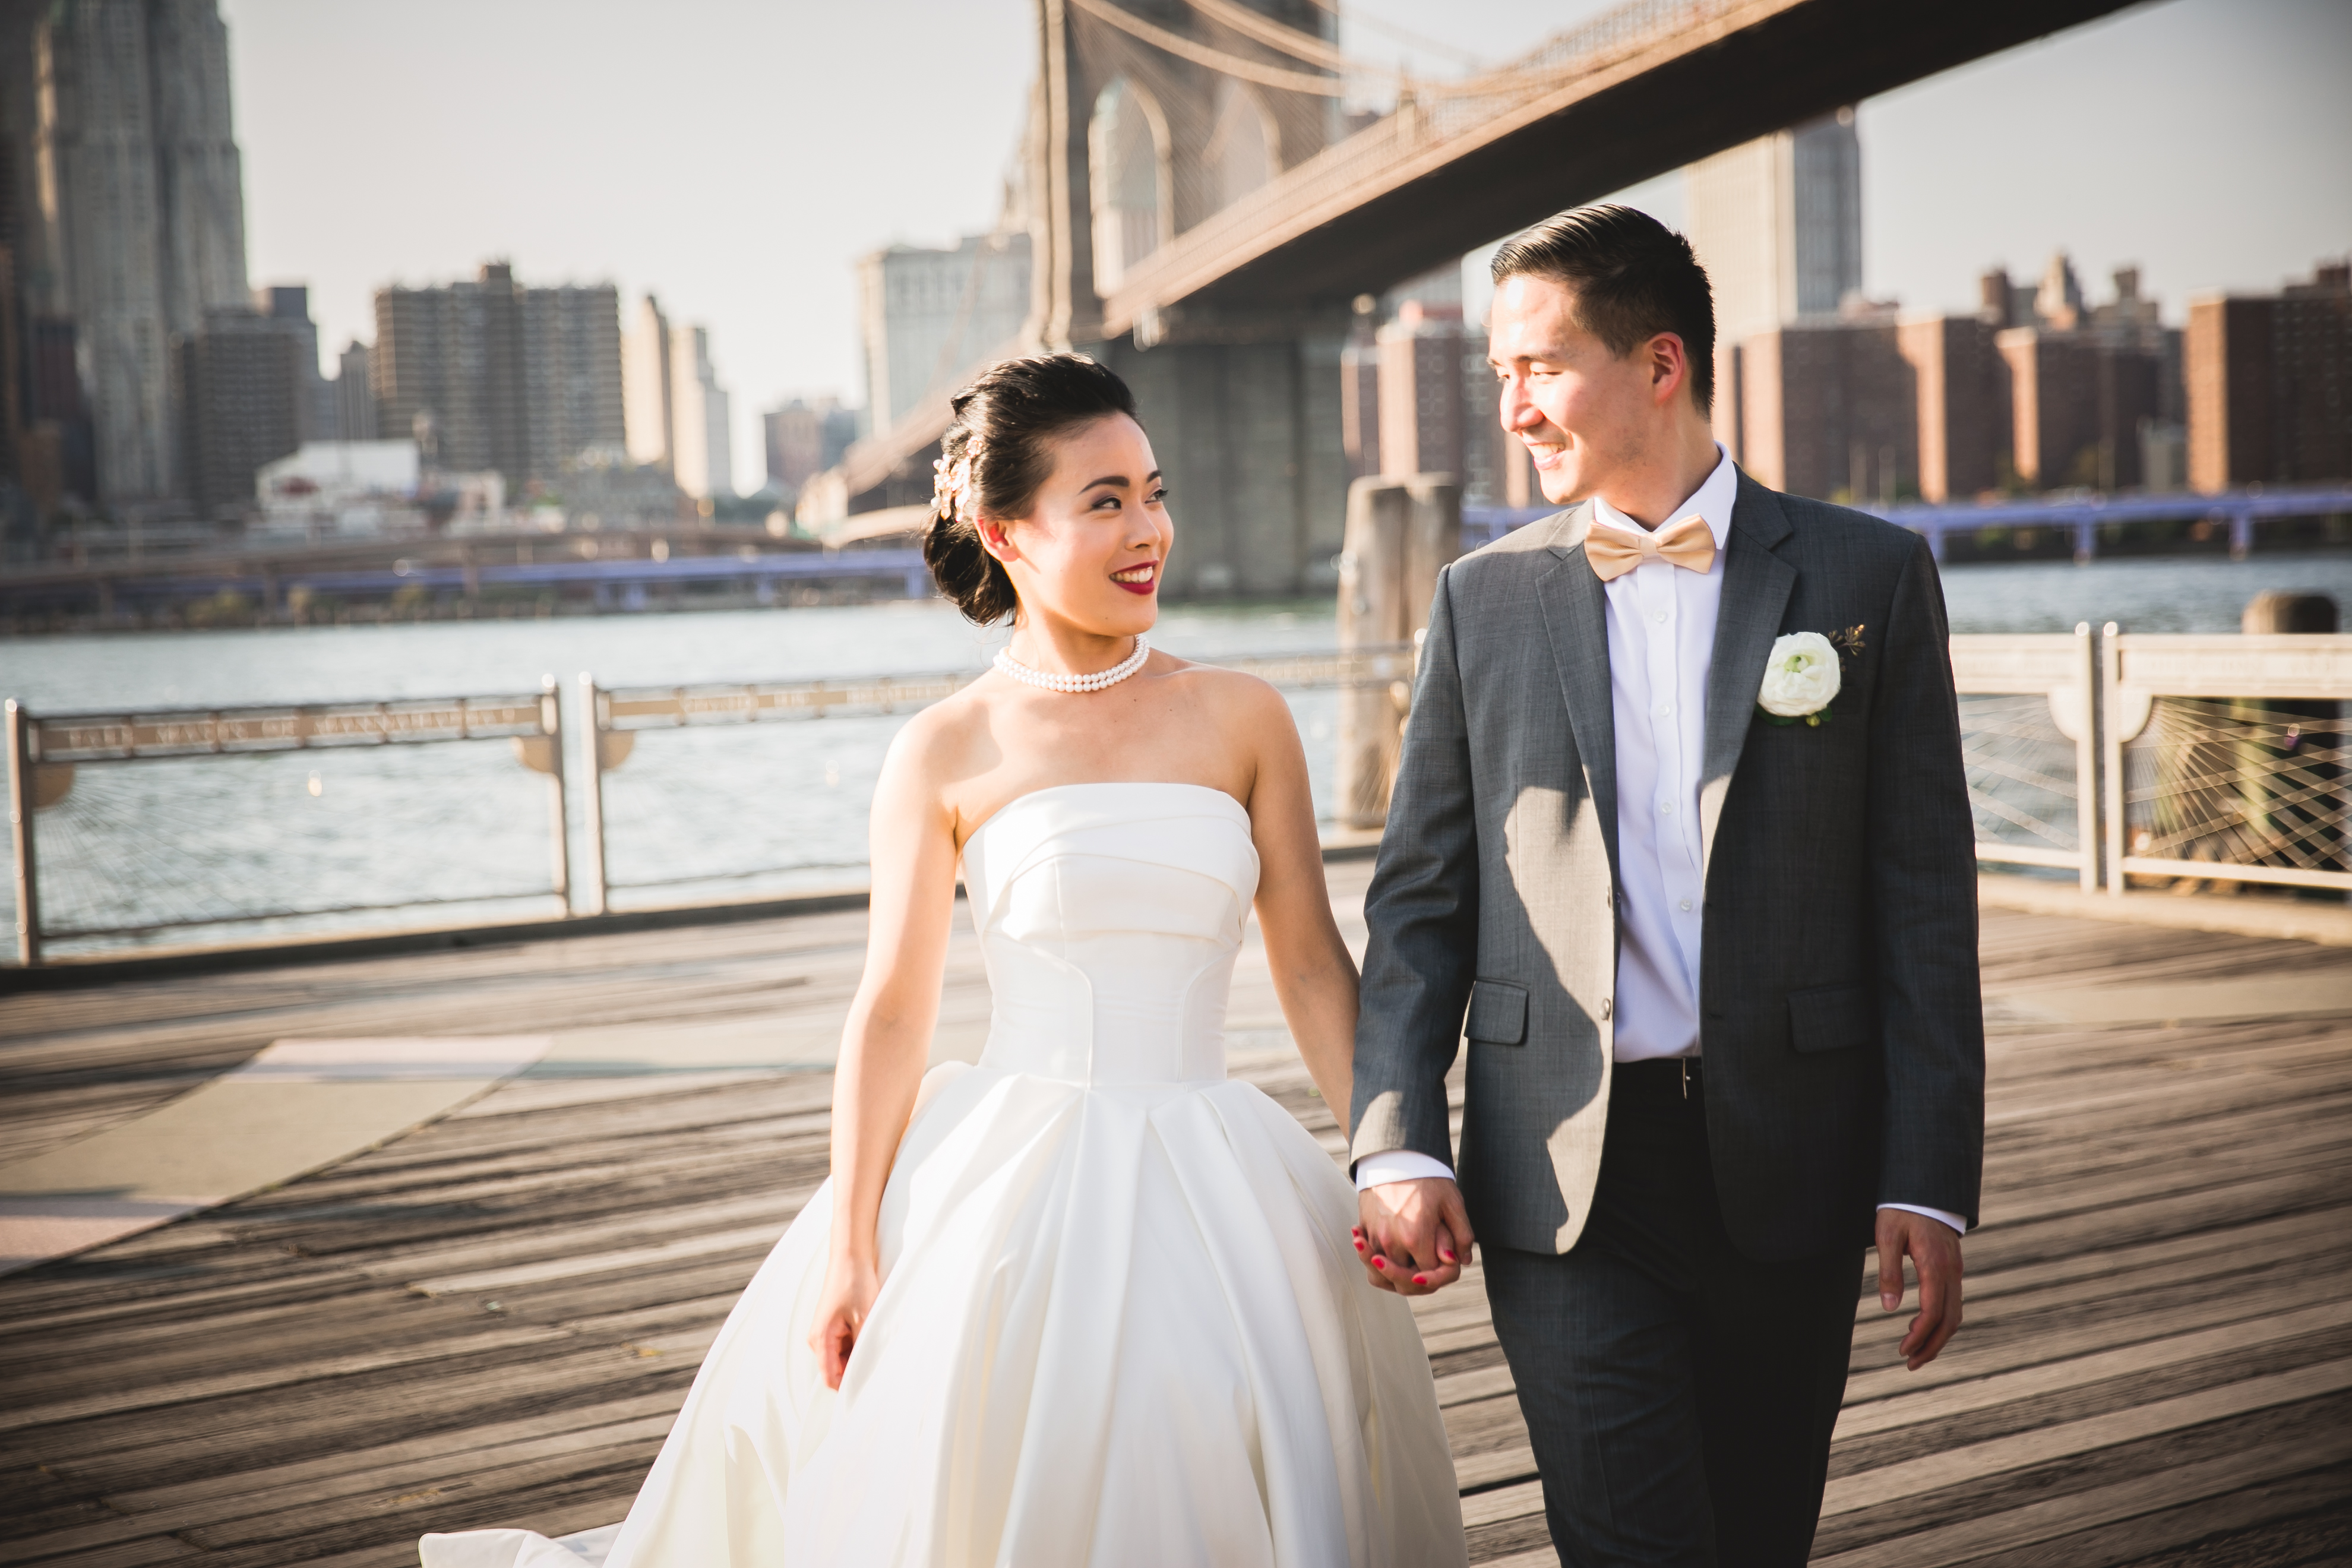 wedding photography pricing in NJ